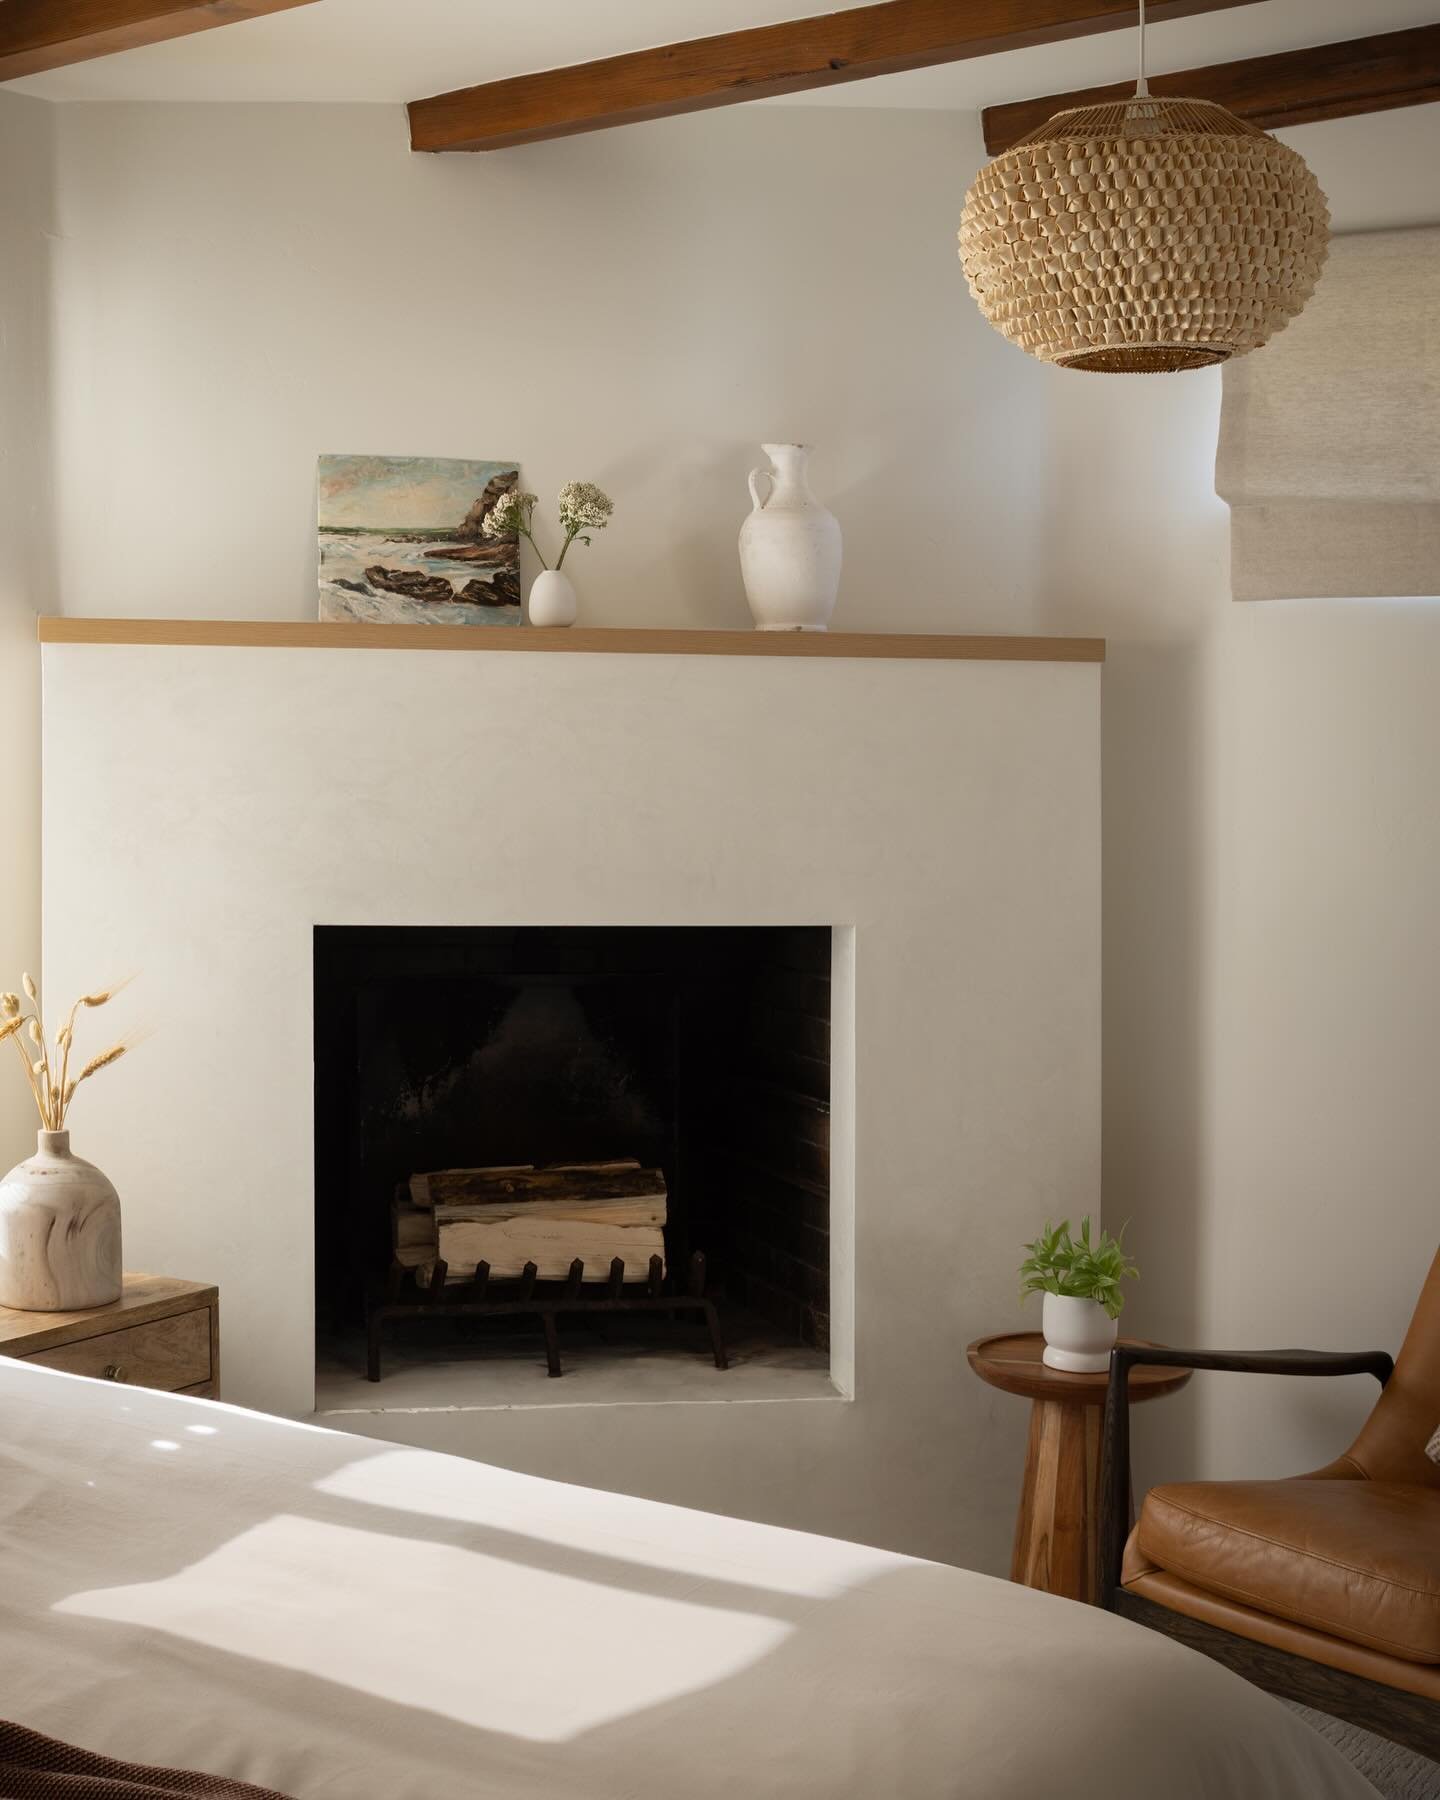 Plaster fireplace 🤍. So simple yet evokes feeling, a space where less is more.

It&rsquo;s  not always drawings to reality. Construction is a layer of the design process-often times during the building phase adjustments may be made/refined and new i